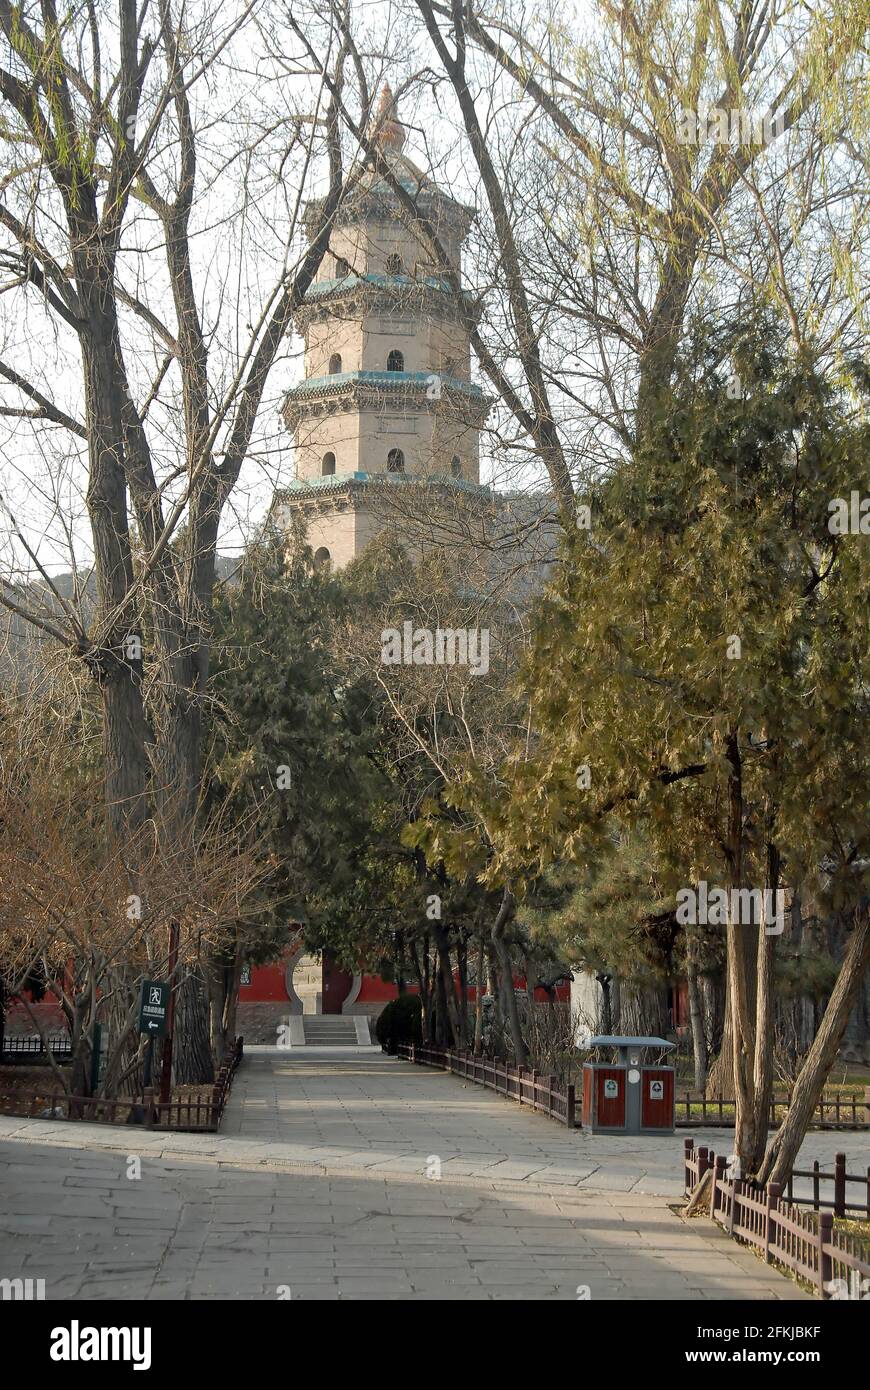 Jinci Temple near Taiyuan, Shanxi, China. View of the pagoda at Jinci Temple looking from the temple garden with trees and paths in the foreground. Stock Photo